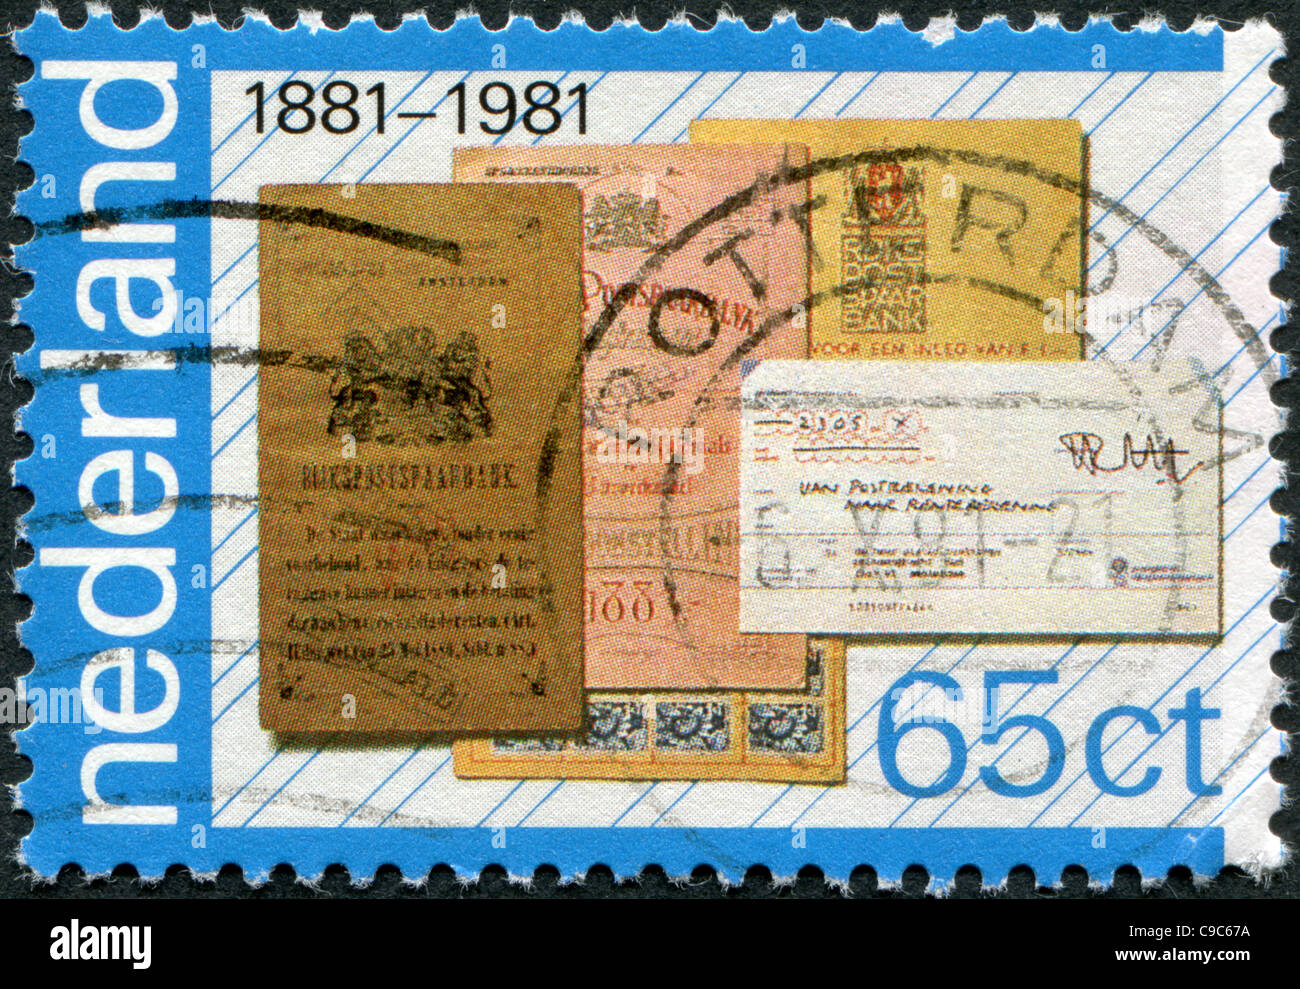 NETHERLANDS 1981: A stamp printed in the Netherlands, is dedicated to the 100th anniversary of the National Savings Bank Stock Photo